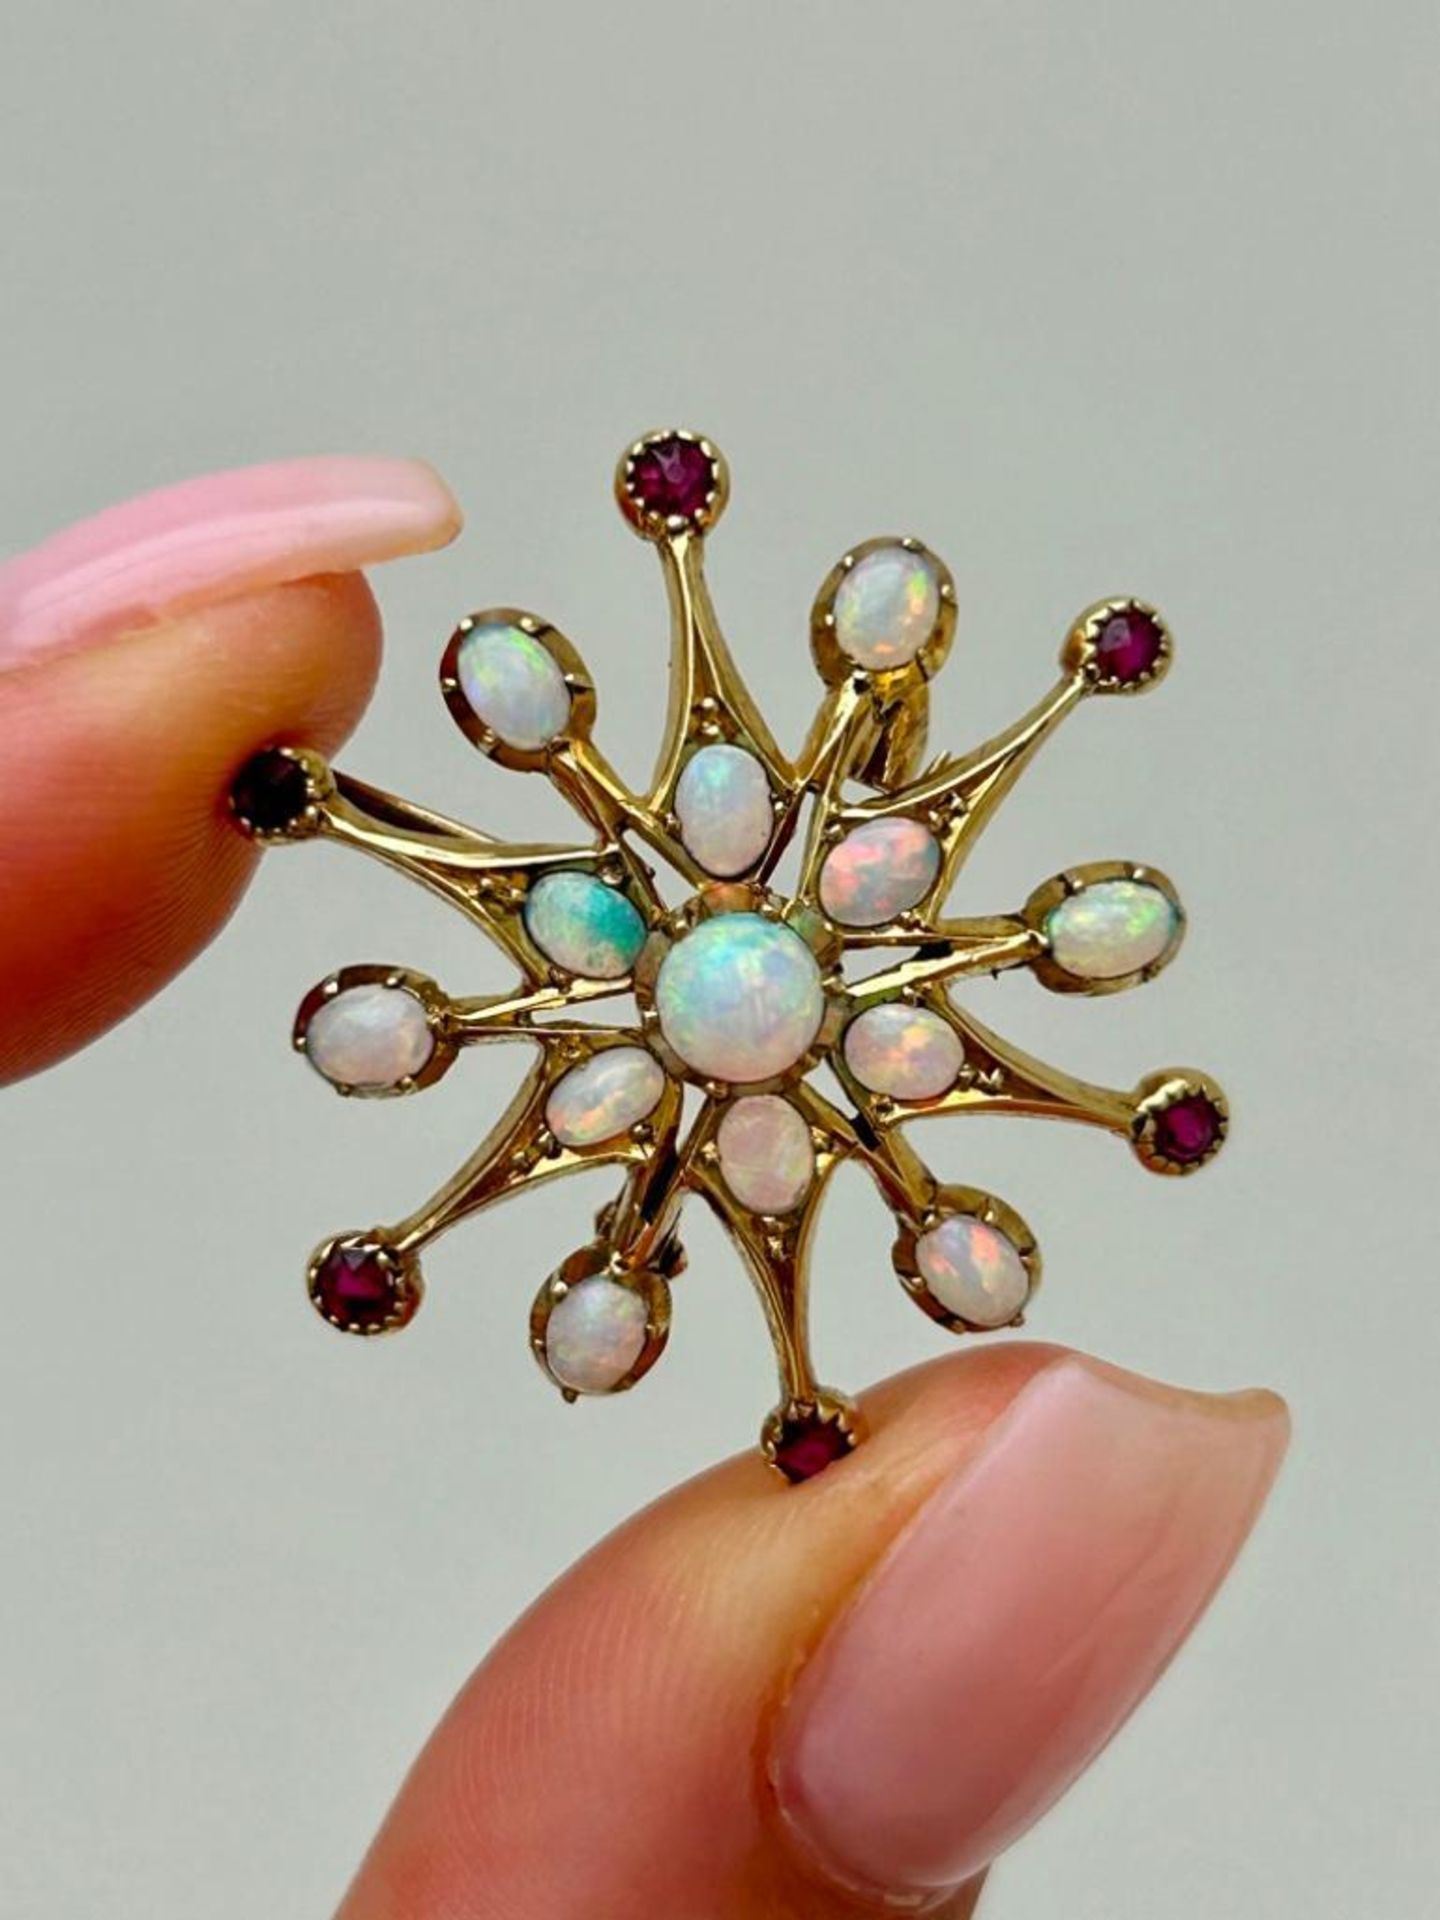 18ct Yellow Gold Ruby and Opal Starburst Brooch / Pendant - Image 3 of 5